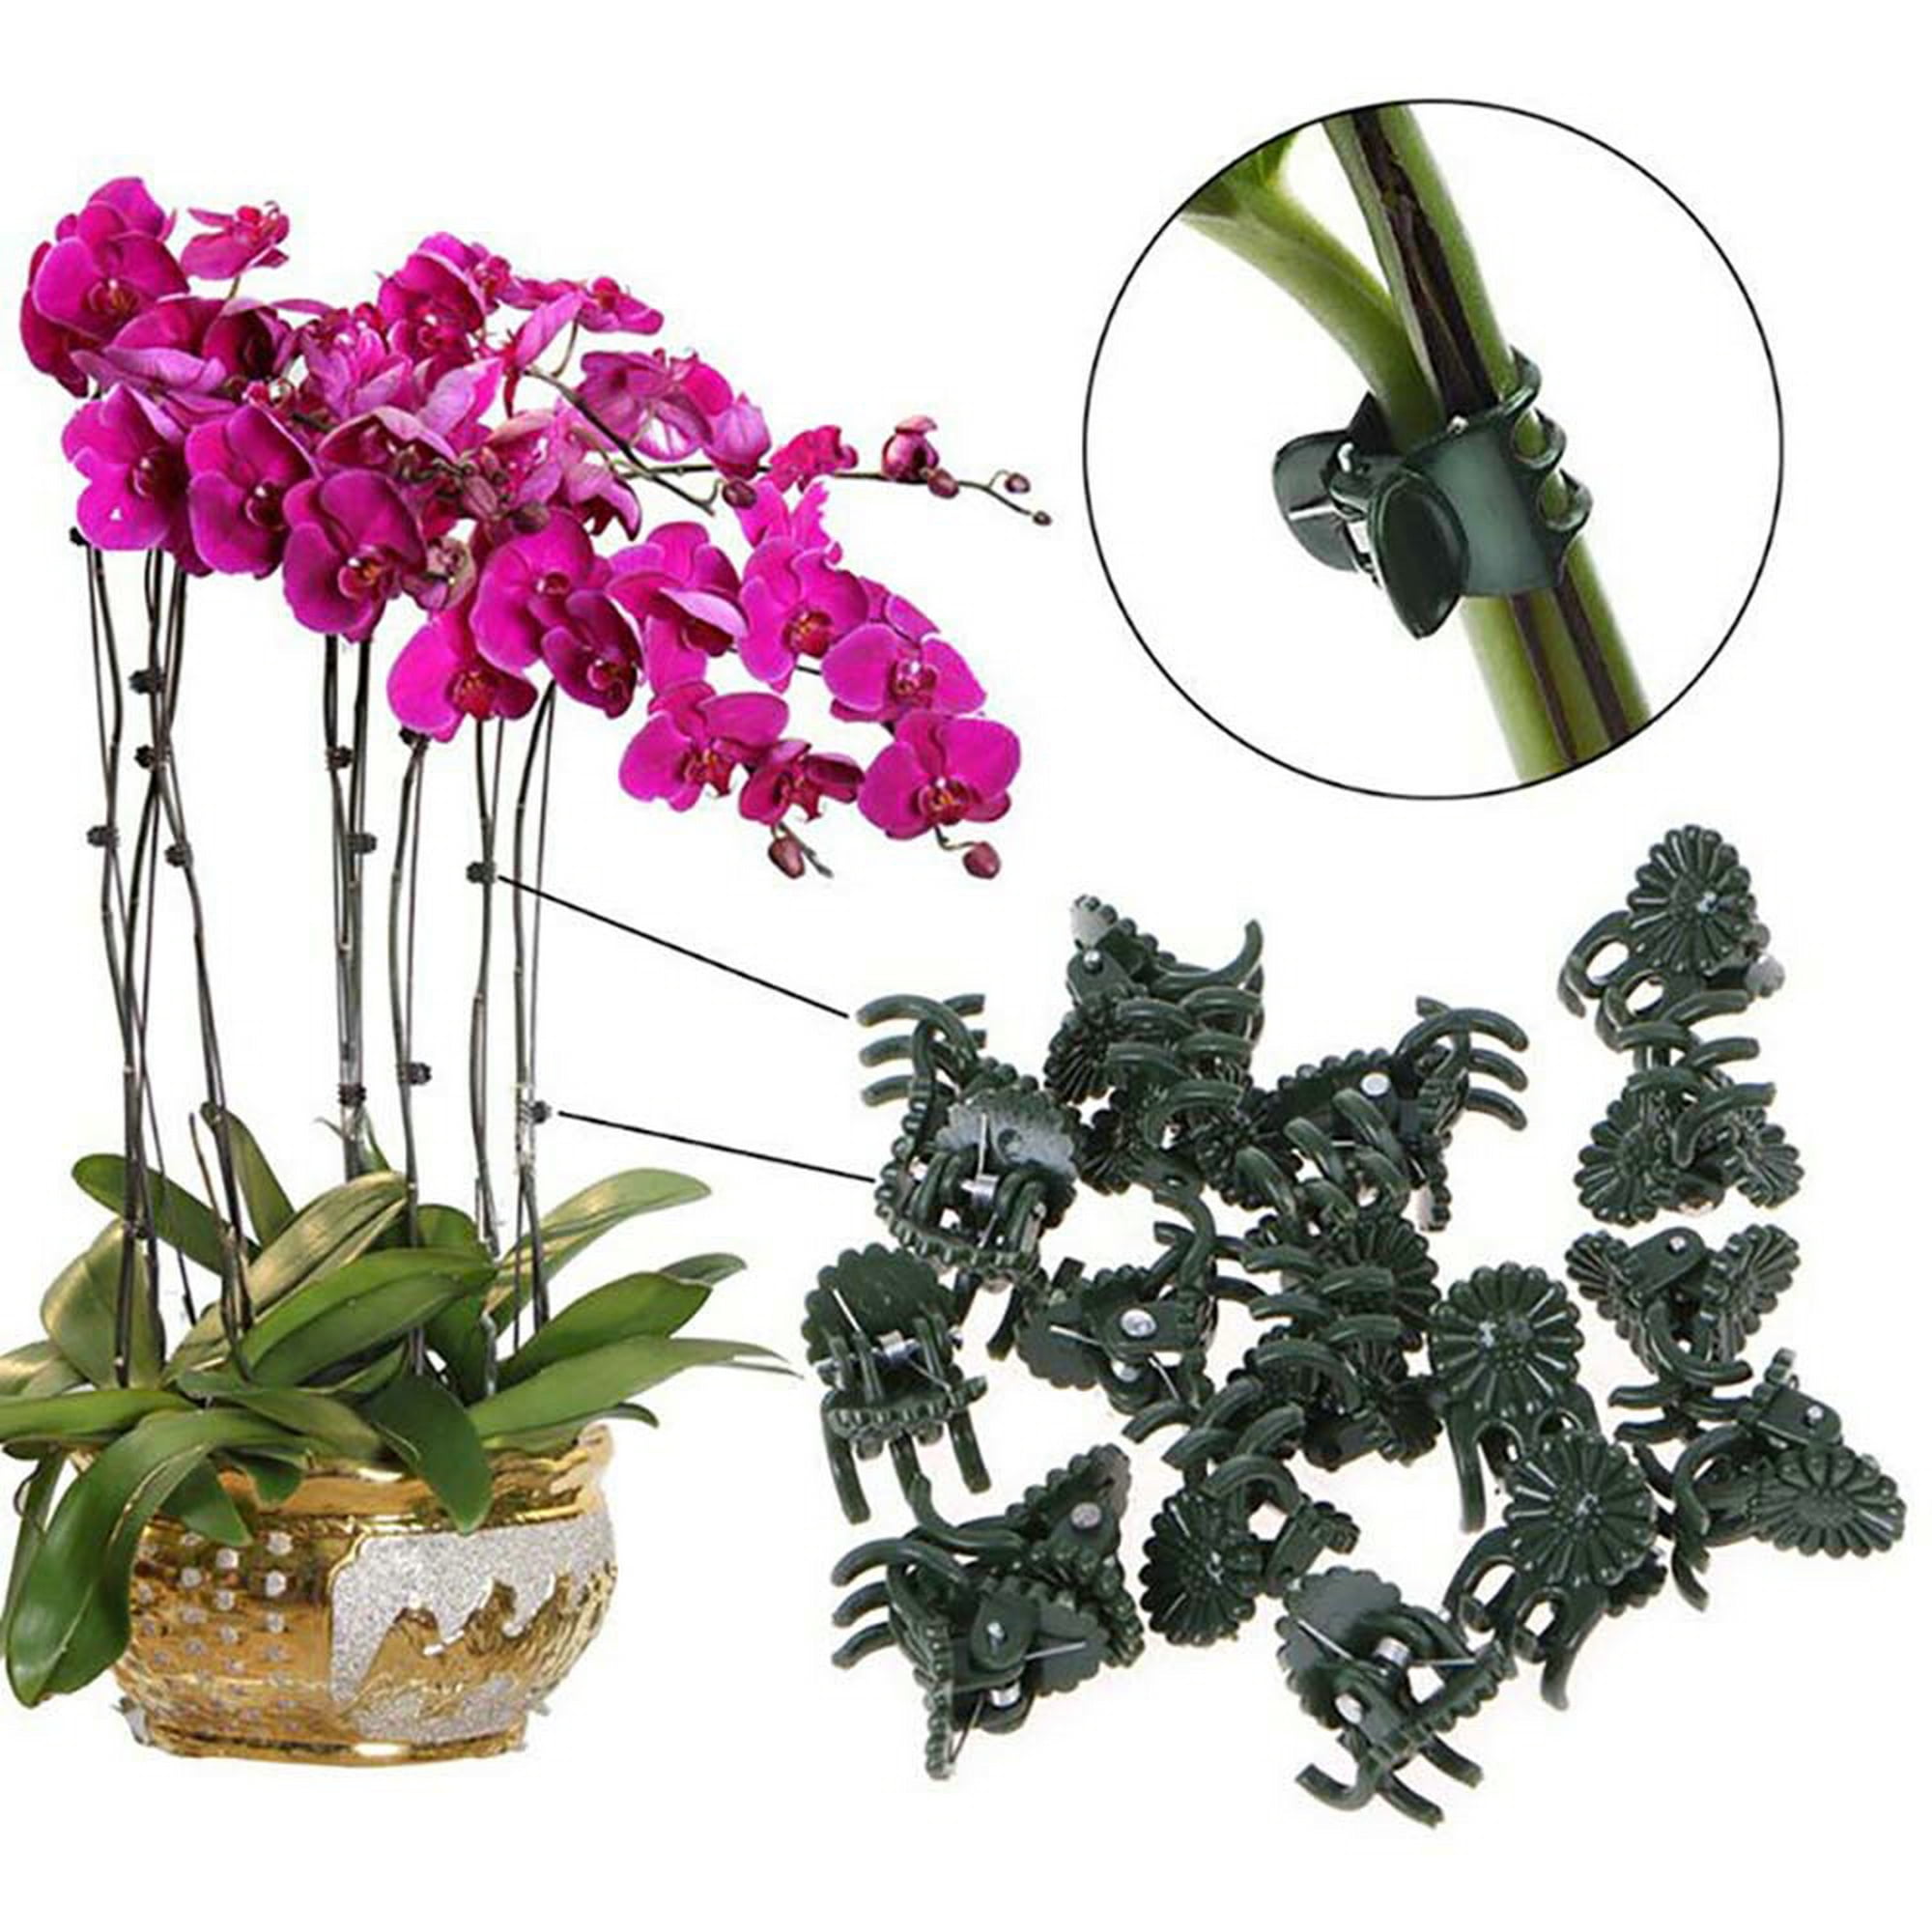 Reusable Fixed Plant Clips Flower Vine Tomato Support Clip Garden Spring Tools d 